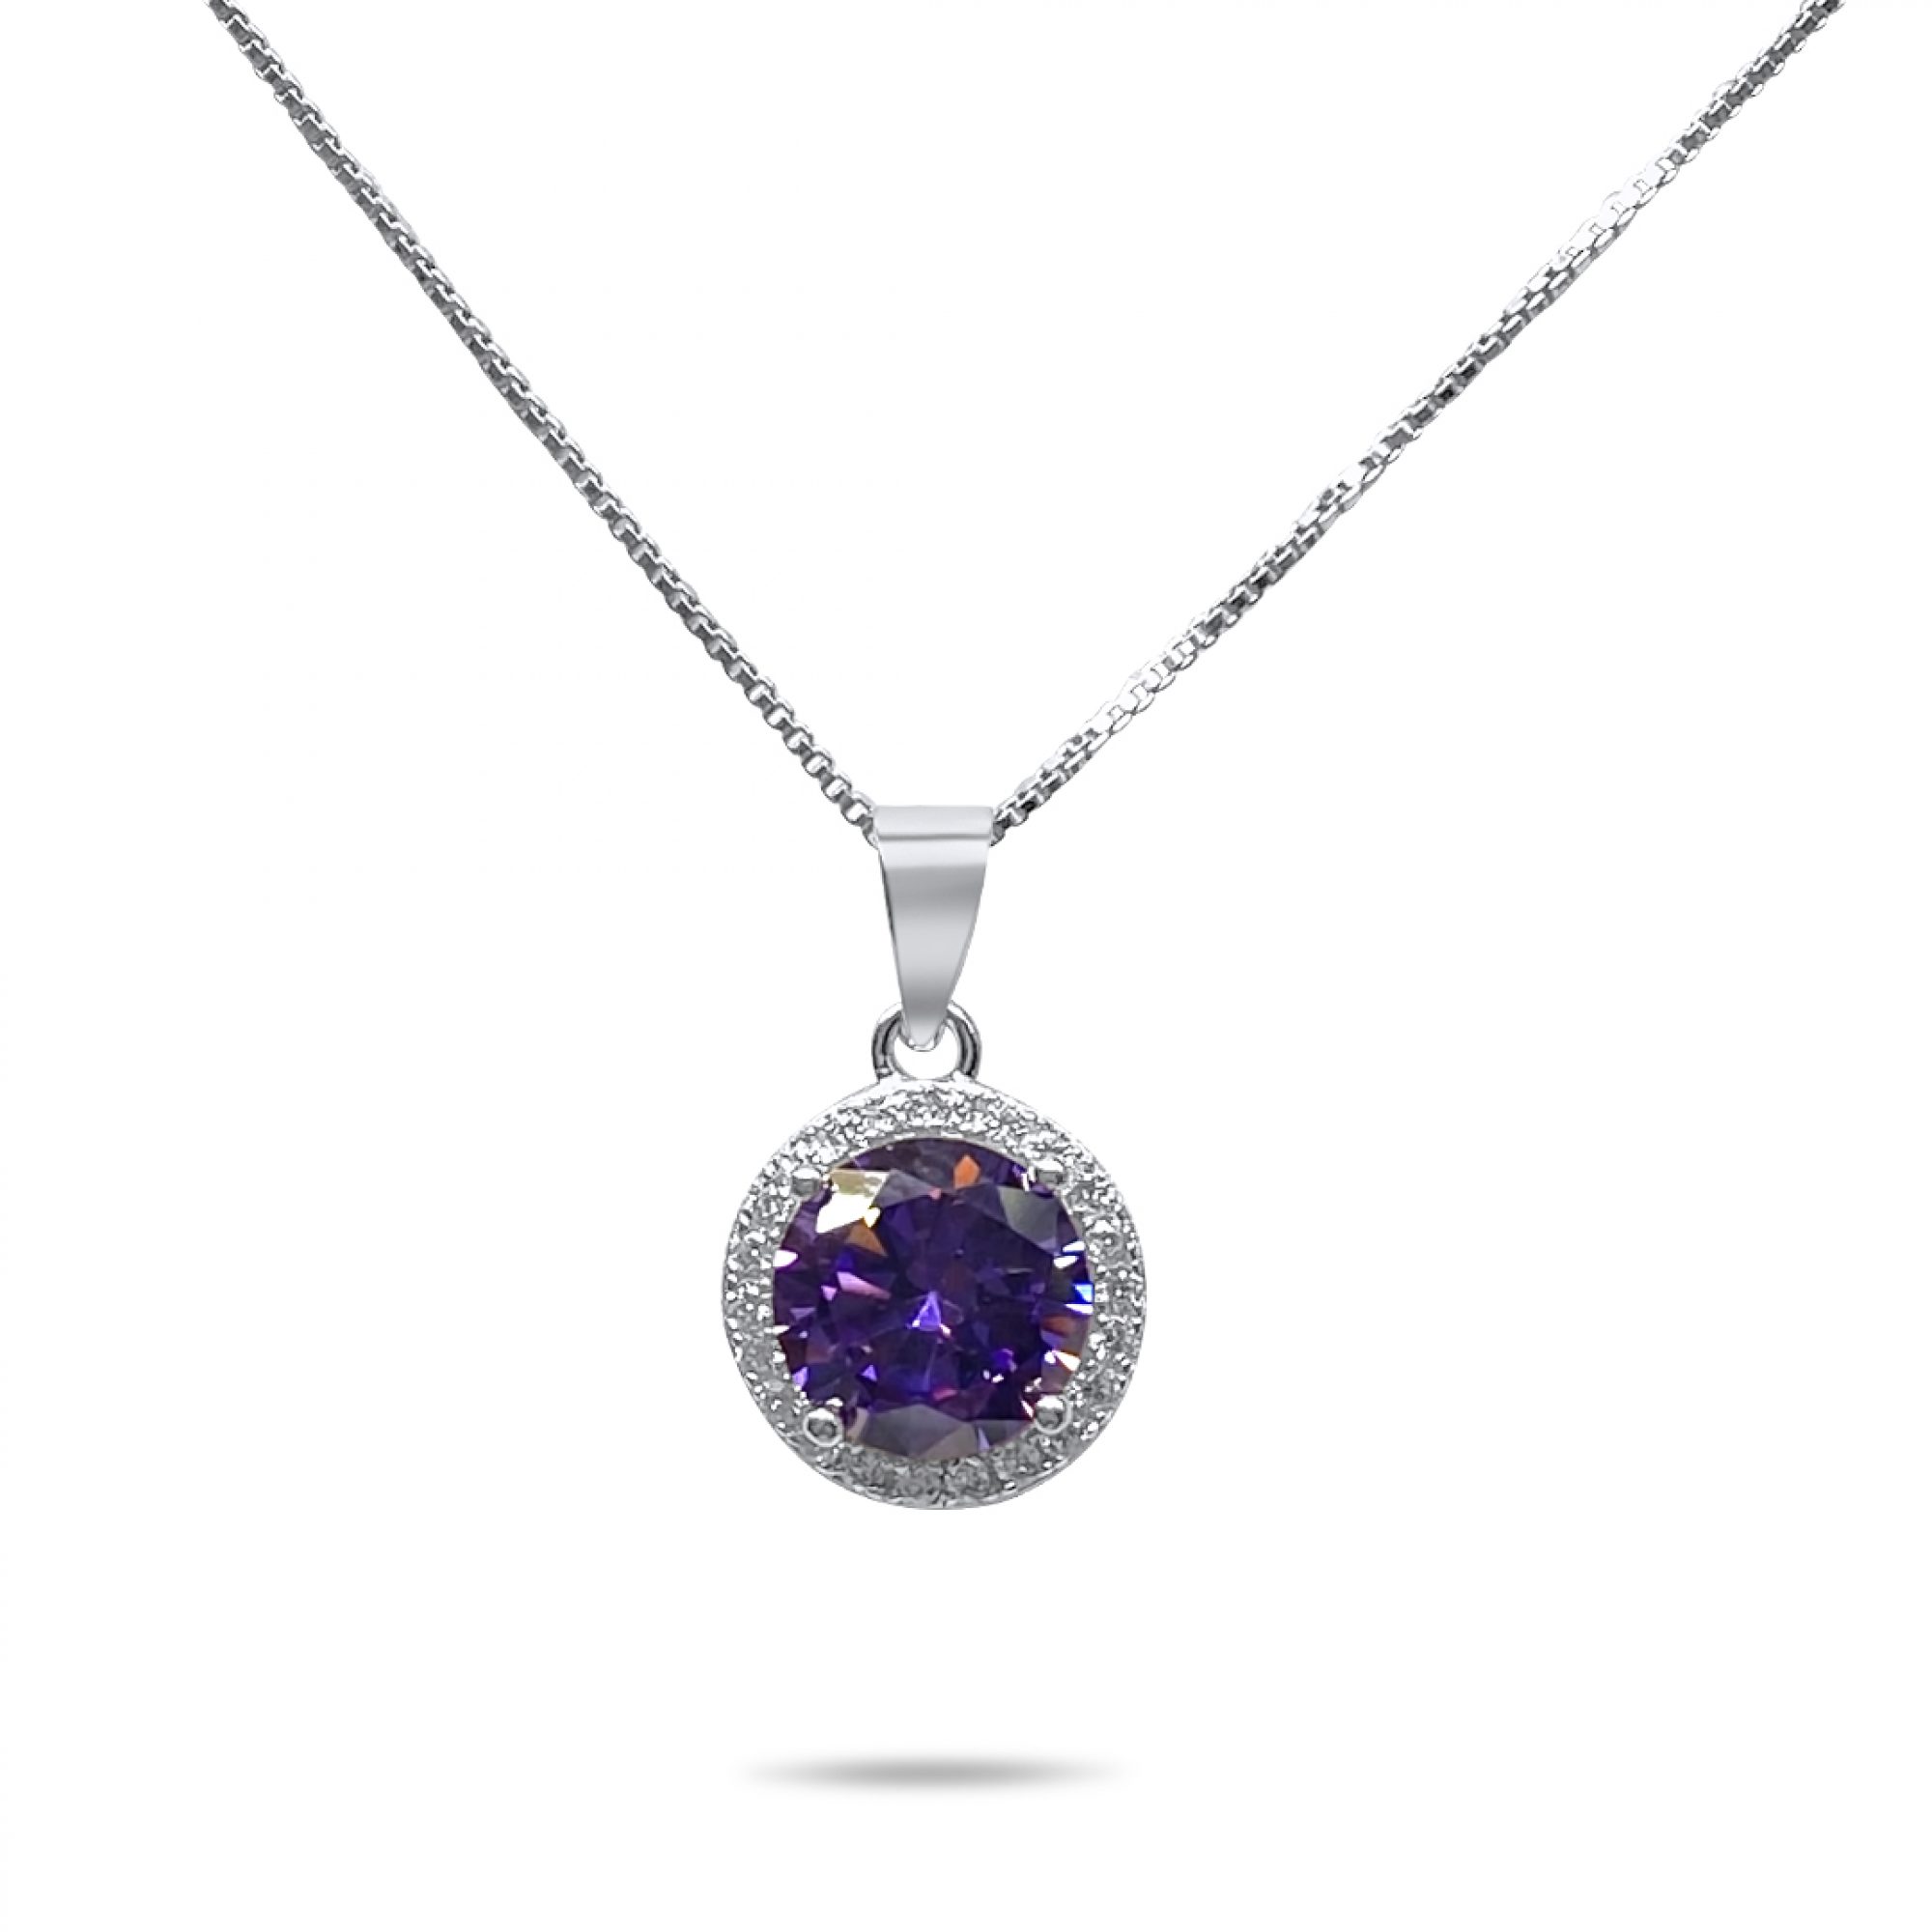 Necklace with amethyst and zircon stones 